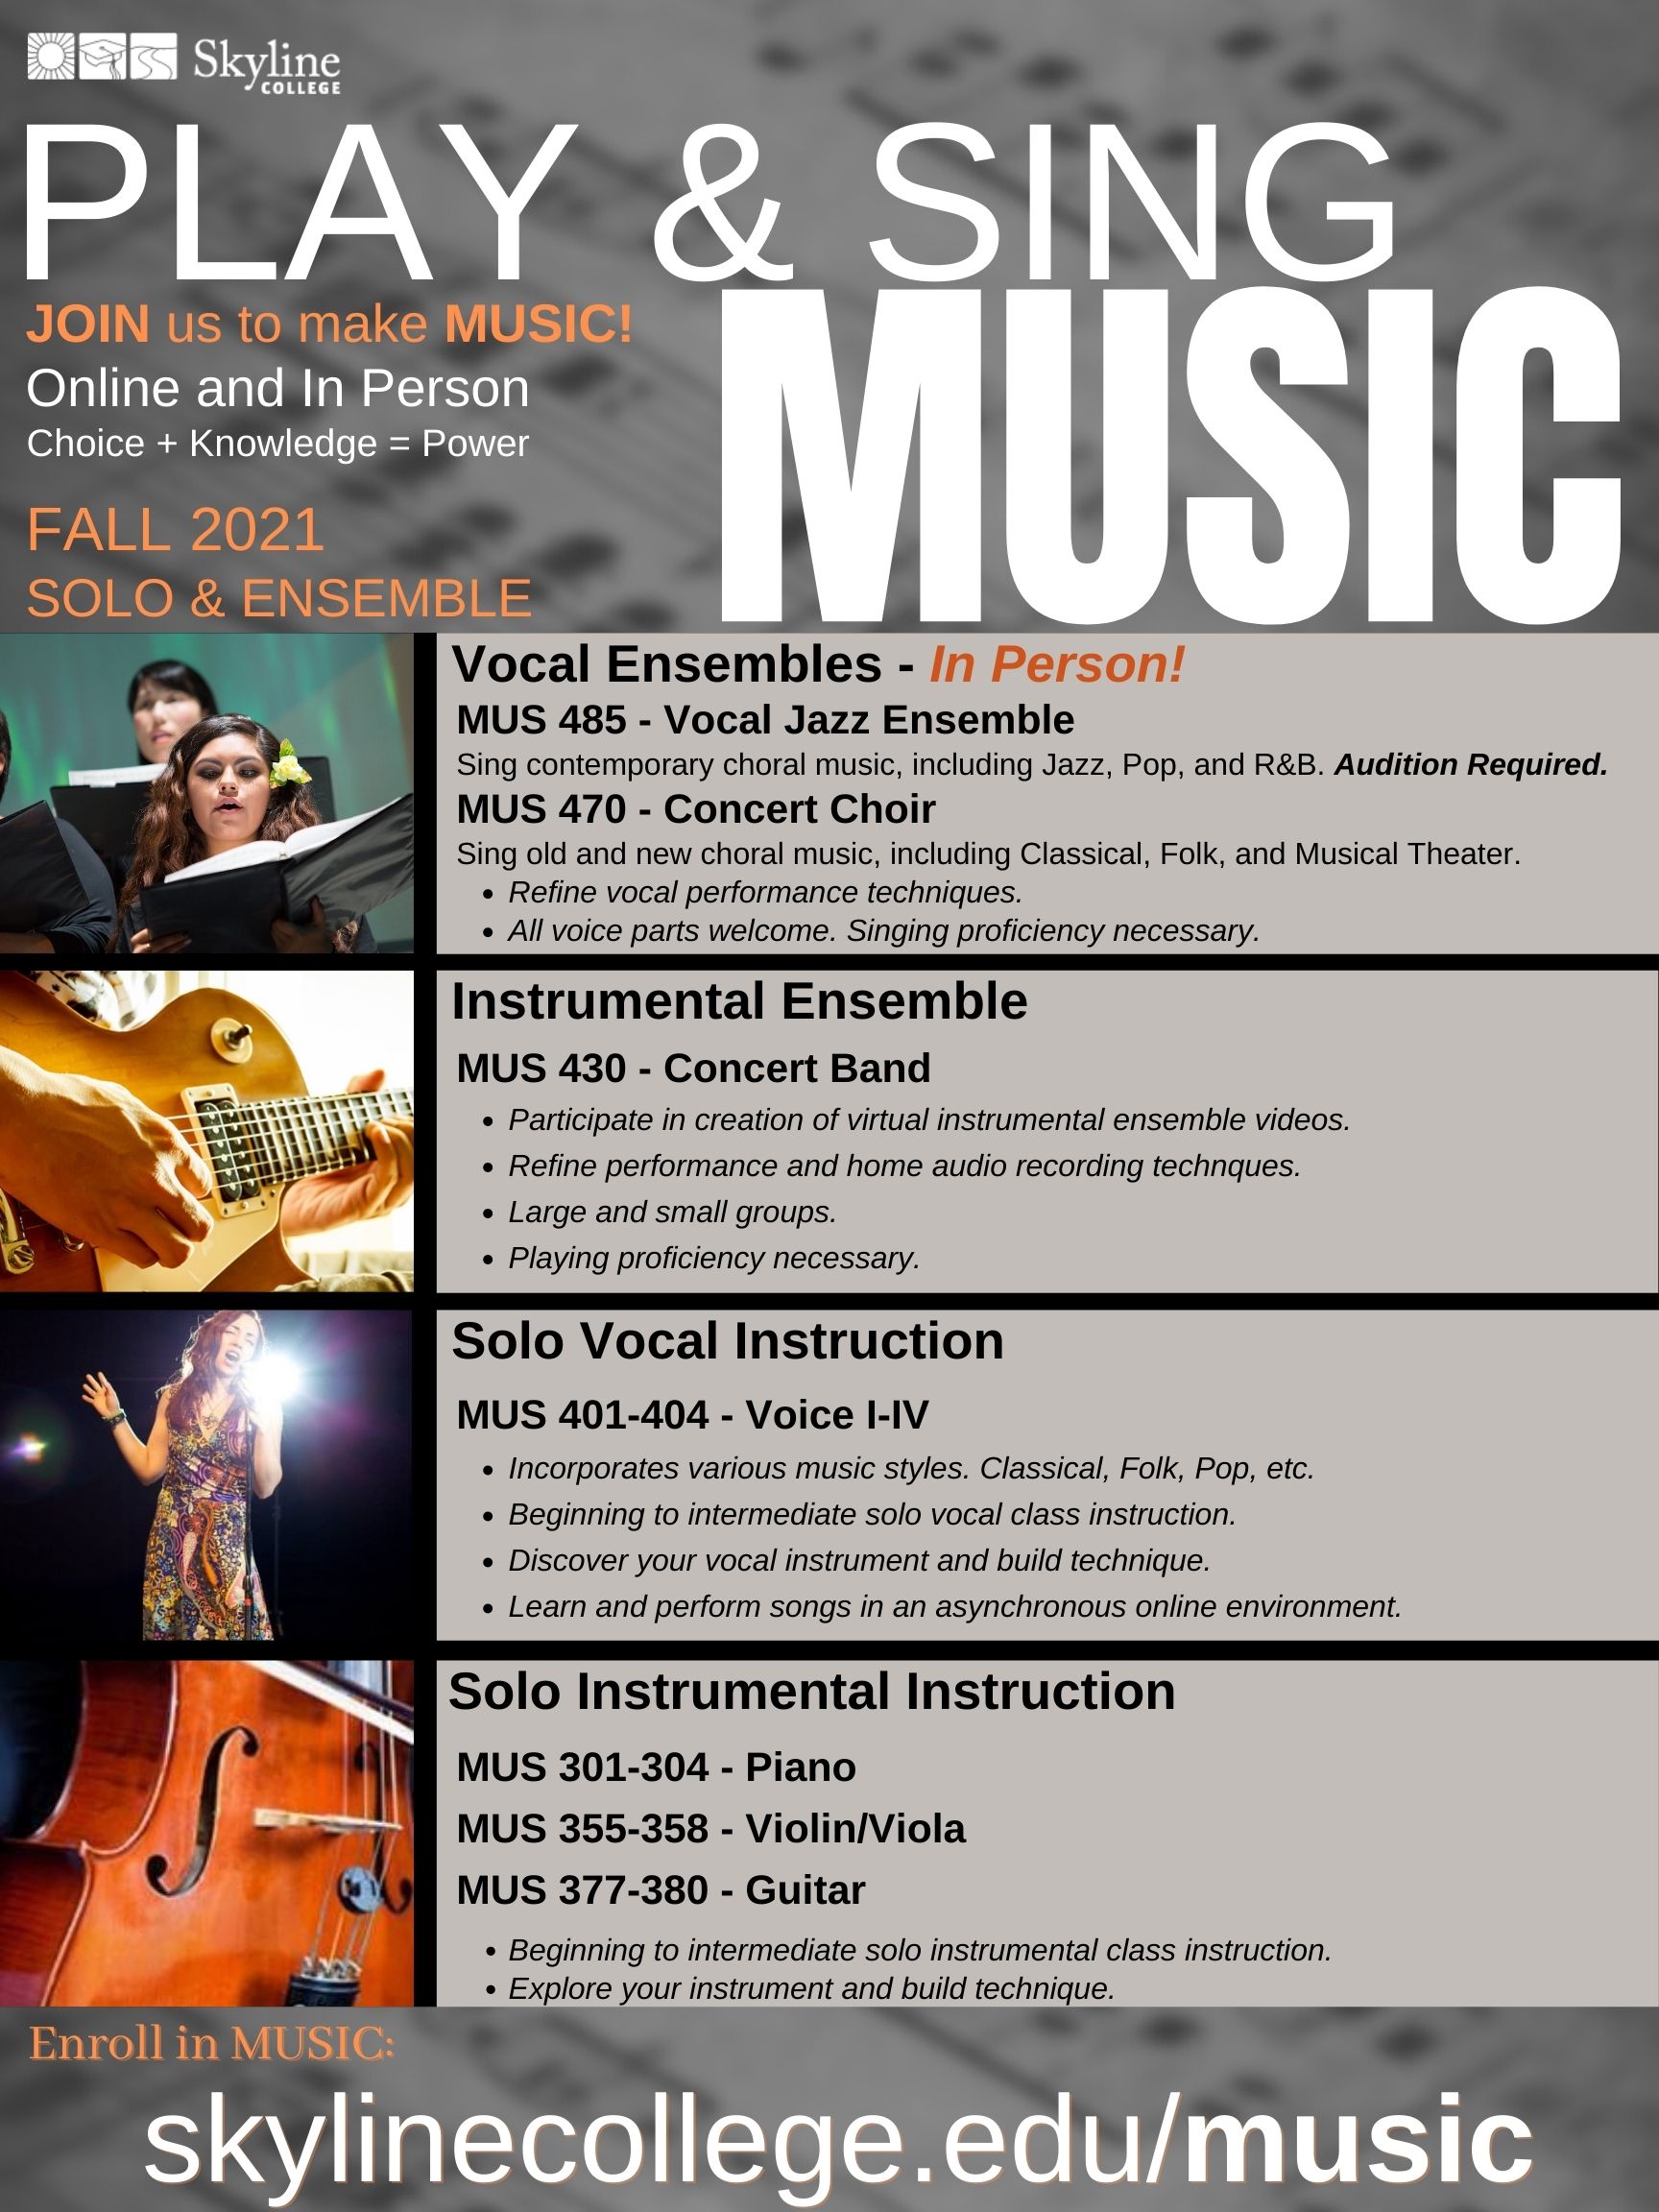 Fall 2021 Music Course Promo Flyer